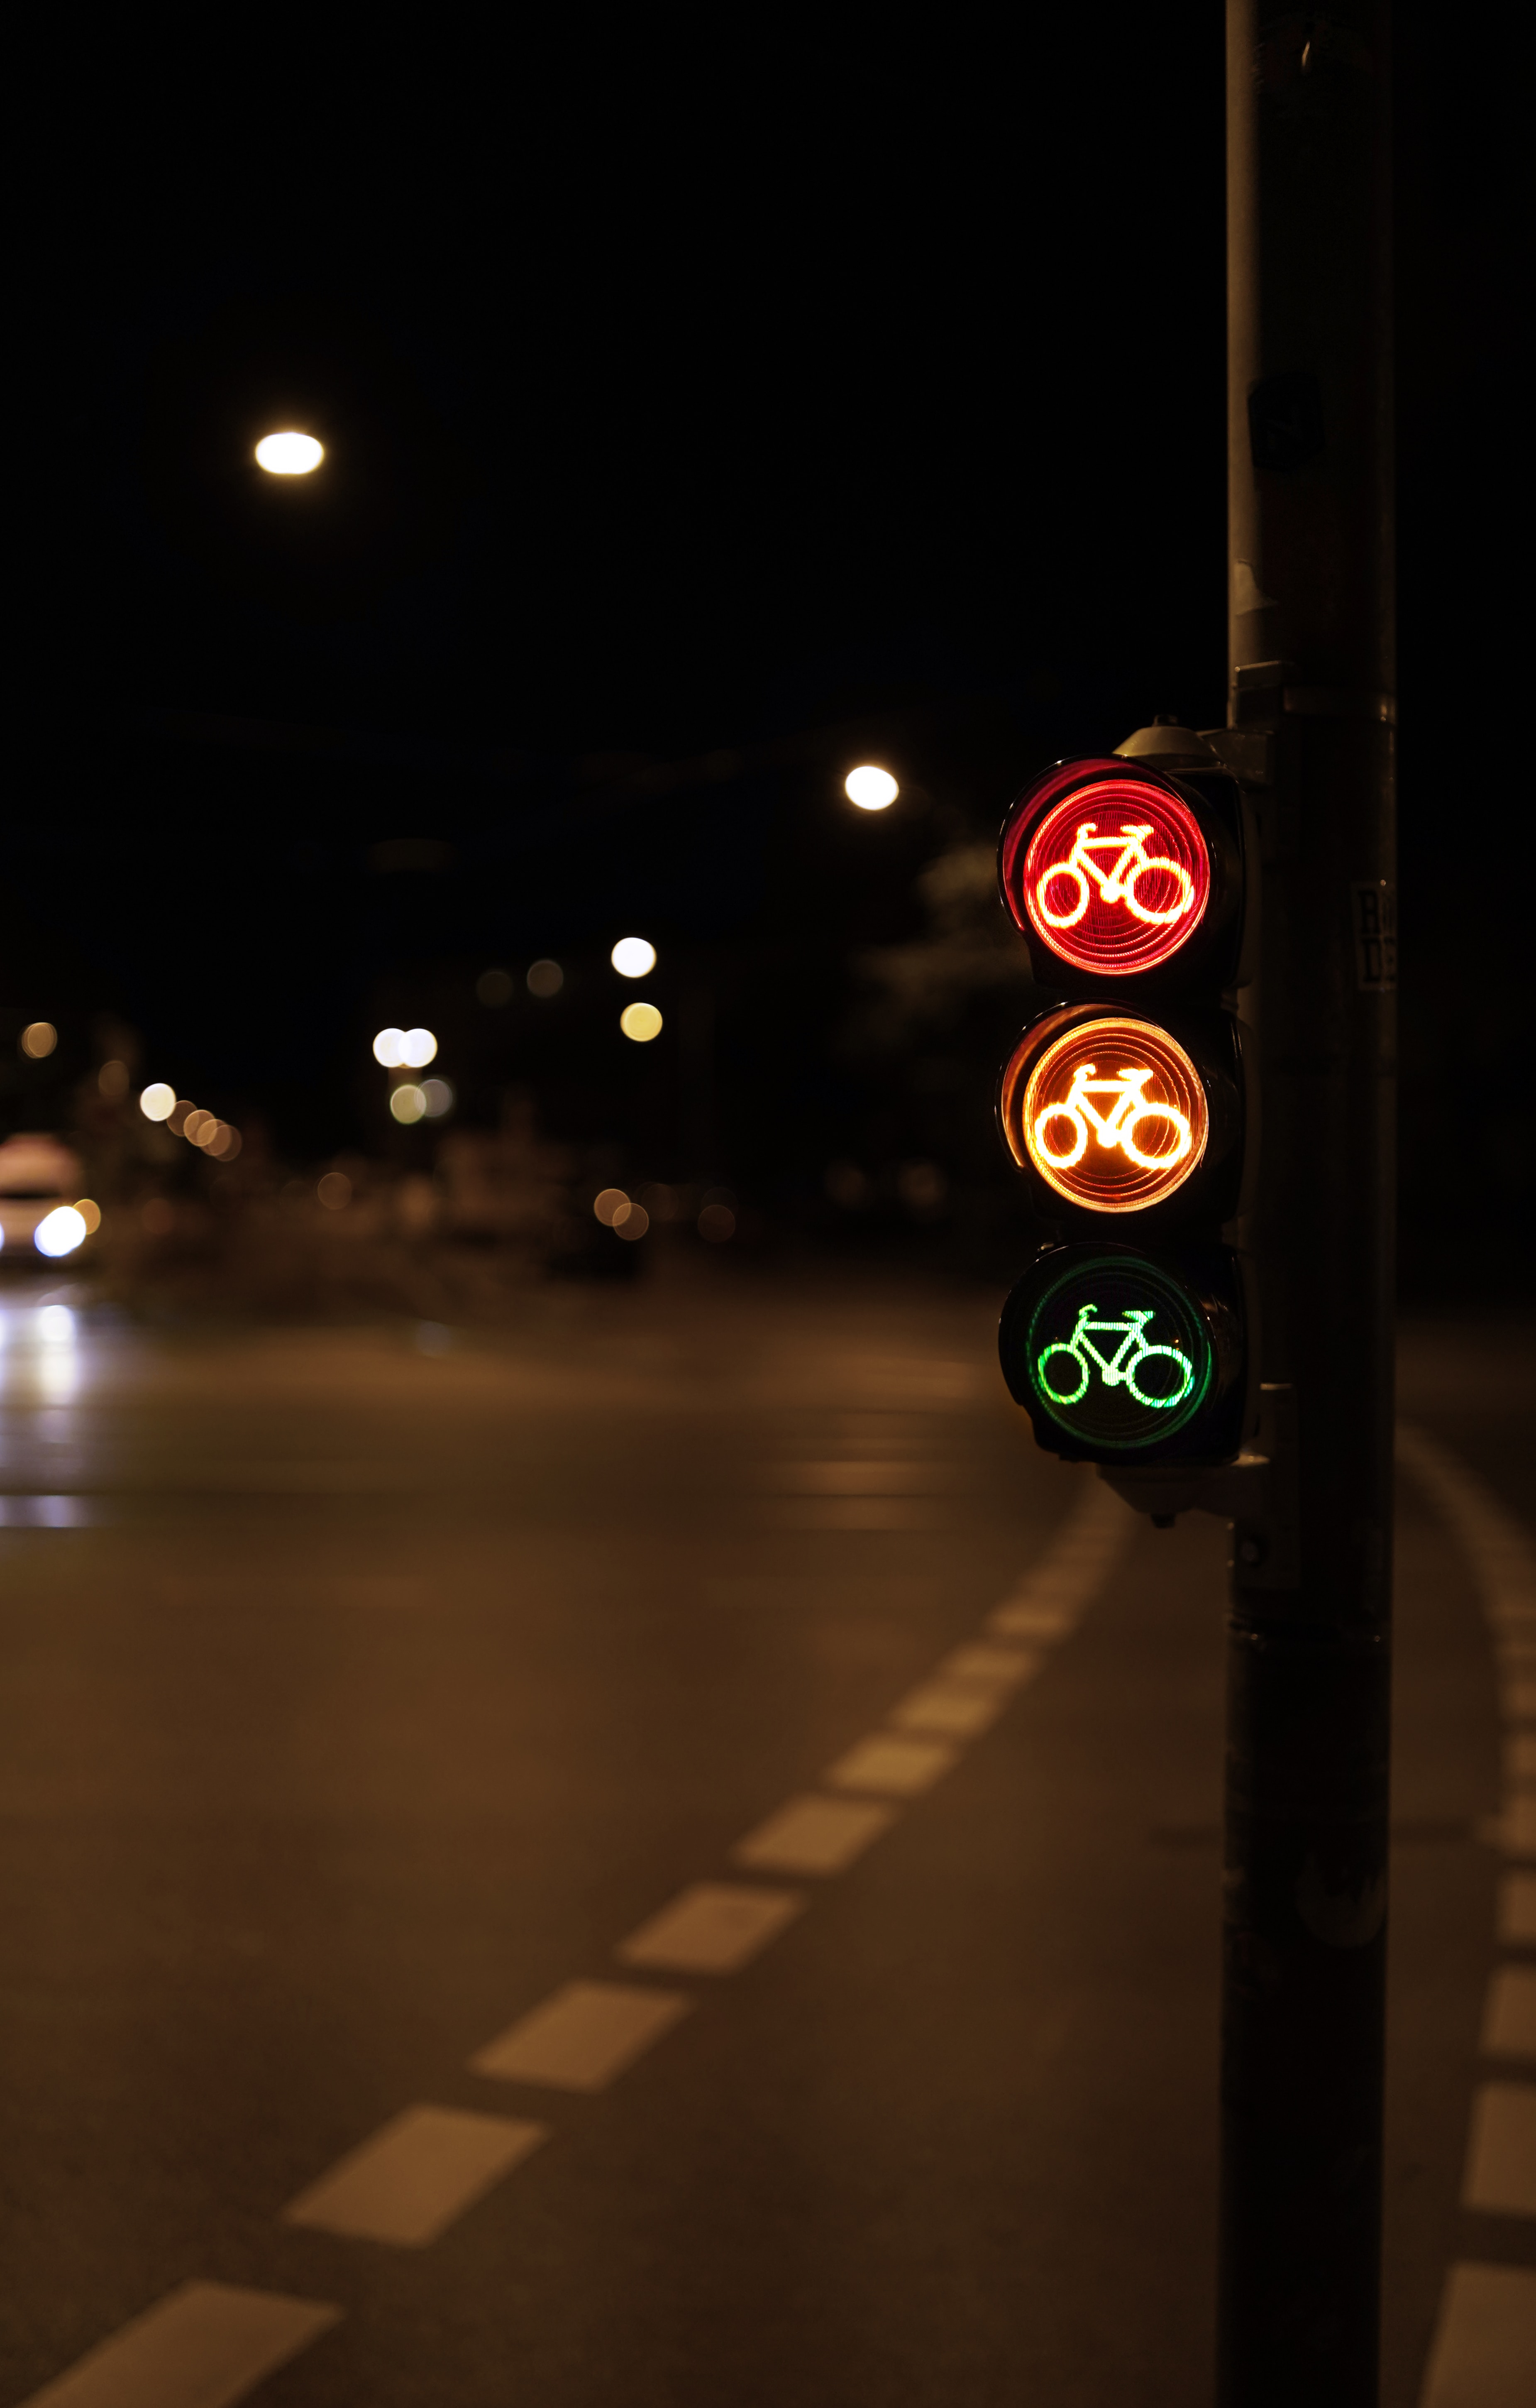 157809 download wallpaper night, miscellanea, miscellaneous, glow, symbol, bicycle, traffic light screensavers and pictures for free